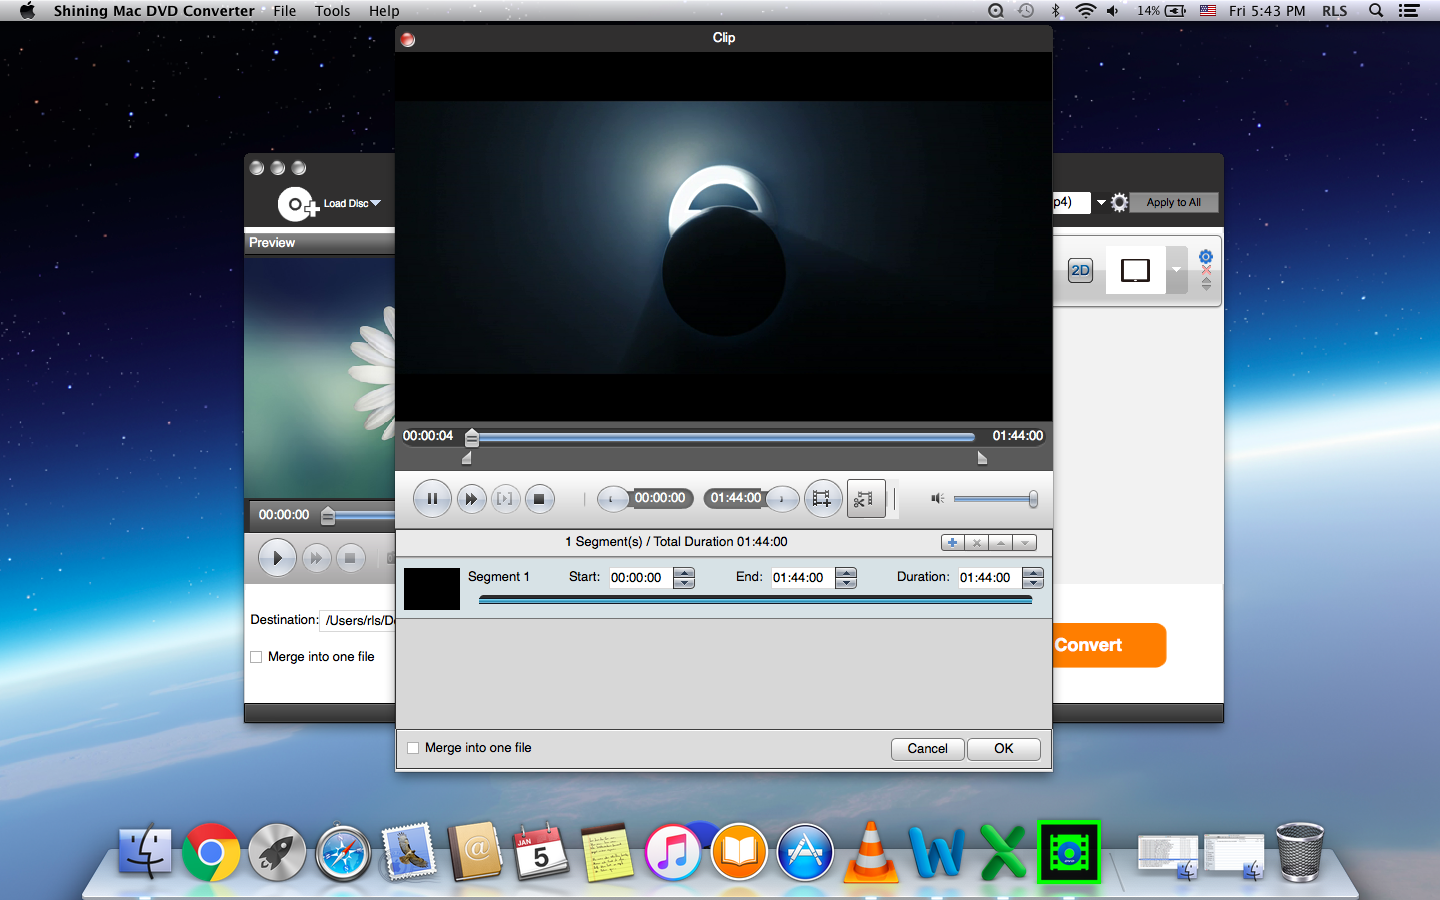 mp4 to dvd converter for mac